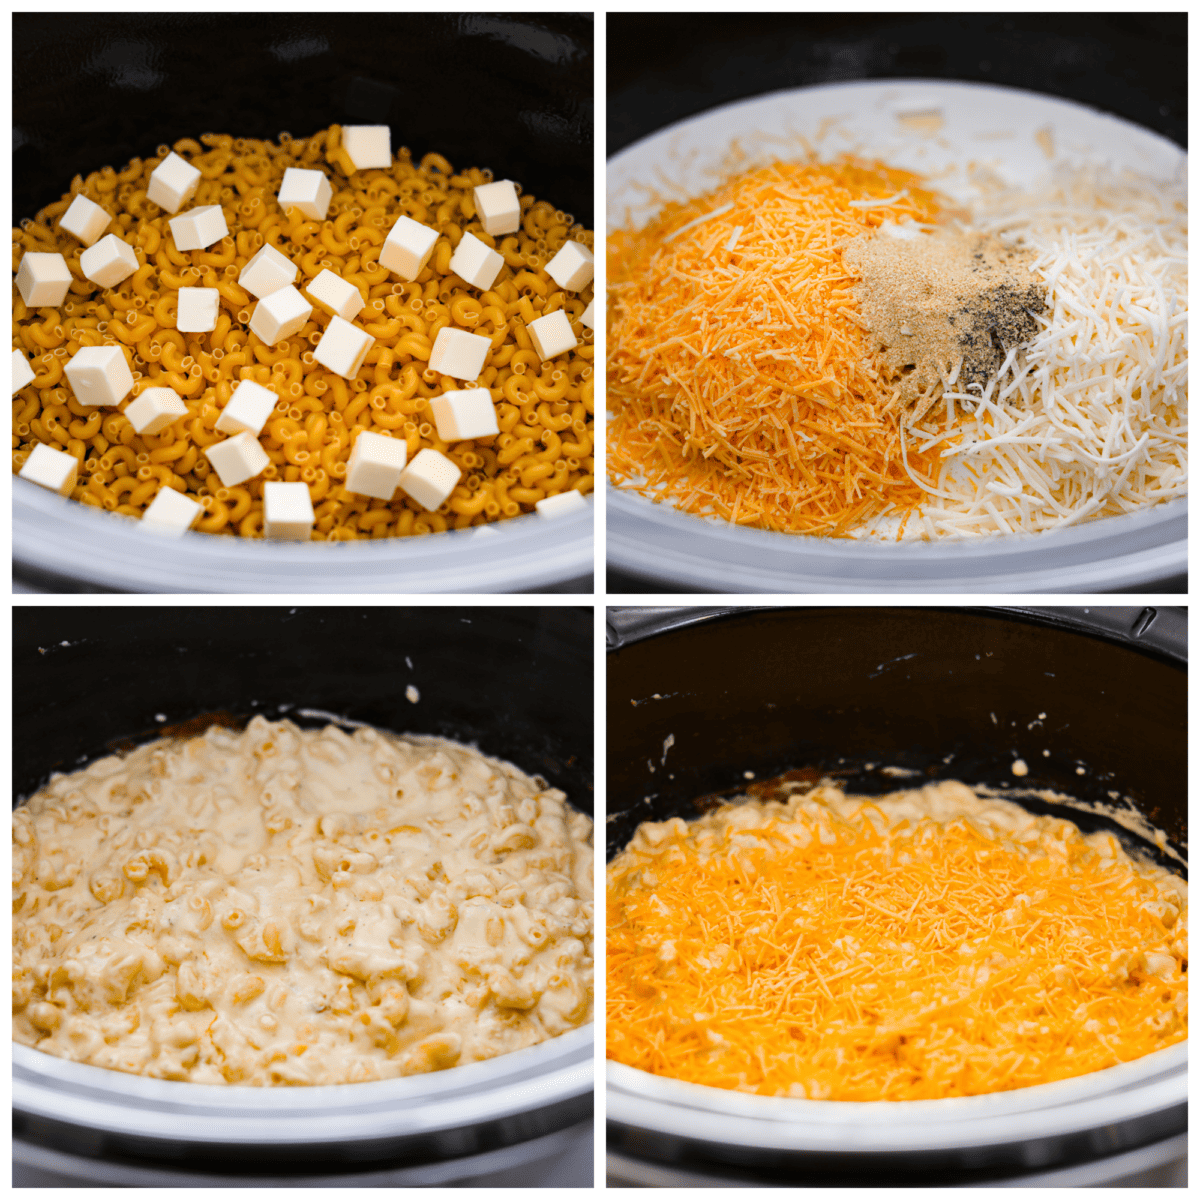 4-photo collage of macaroni and cheese ingredients being added to a slow cooker.